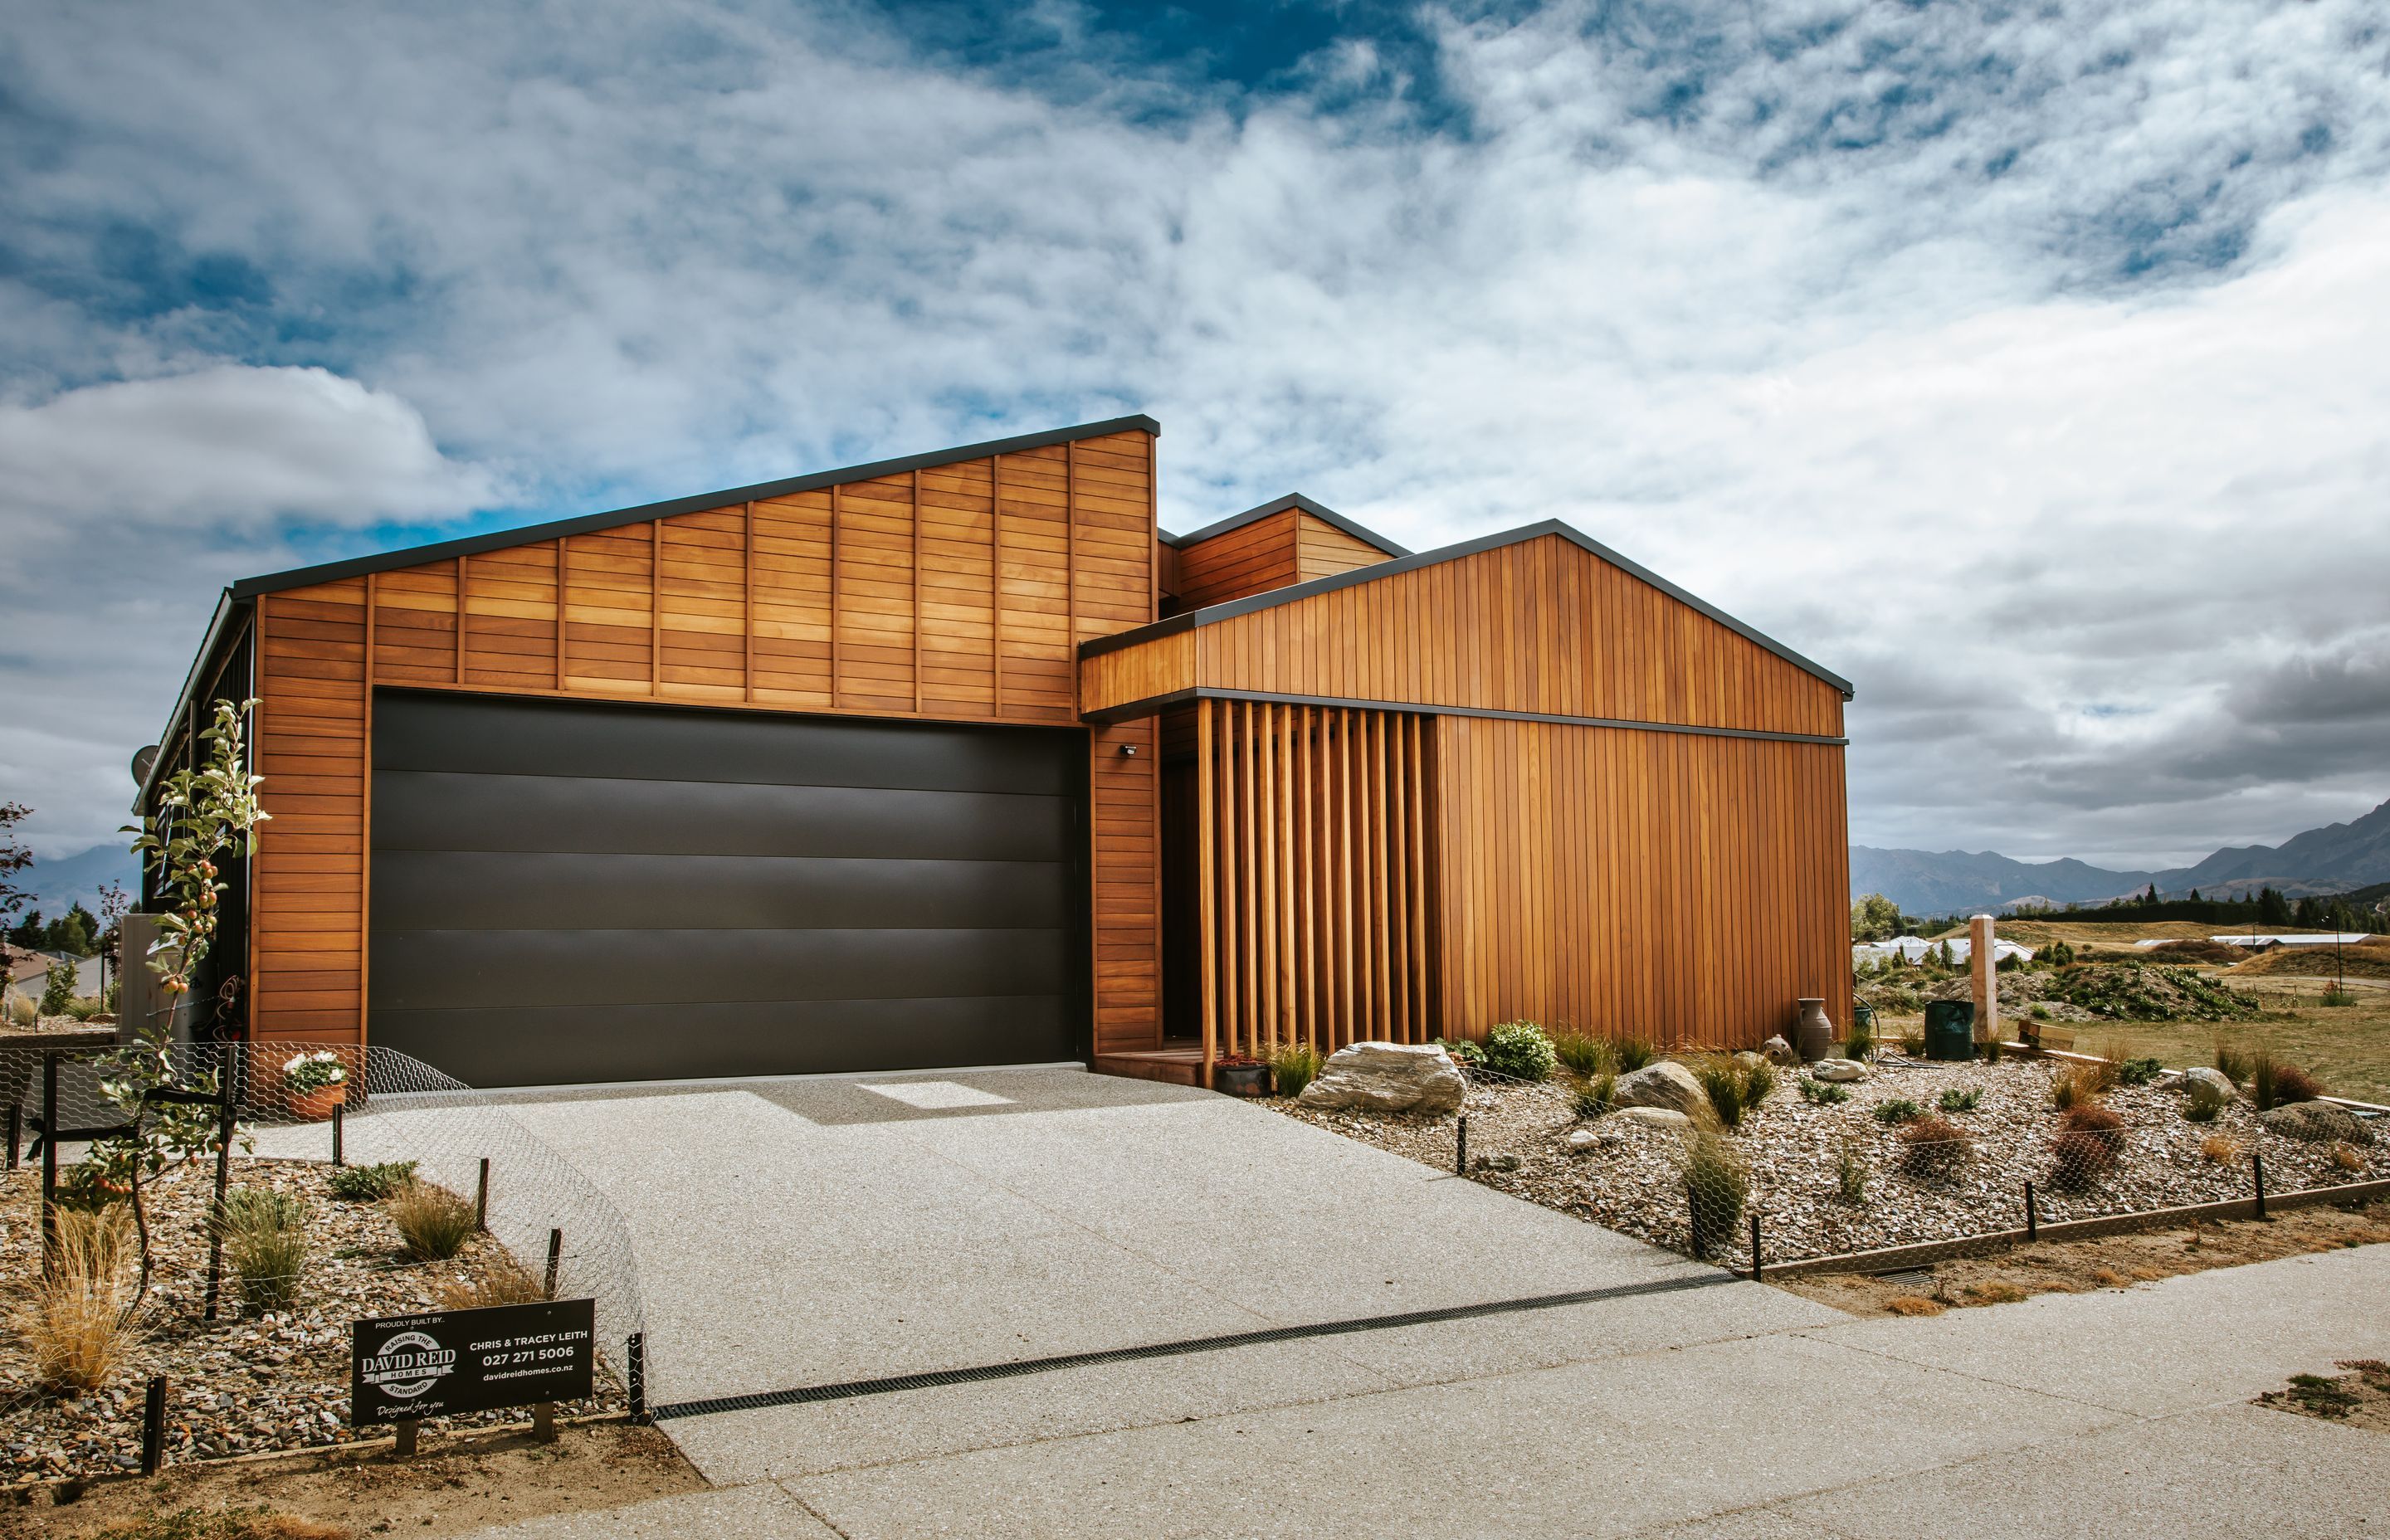 The road-facing elevation features Truwood cladding in varying horizontal, vertical and battened formations.